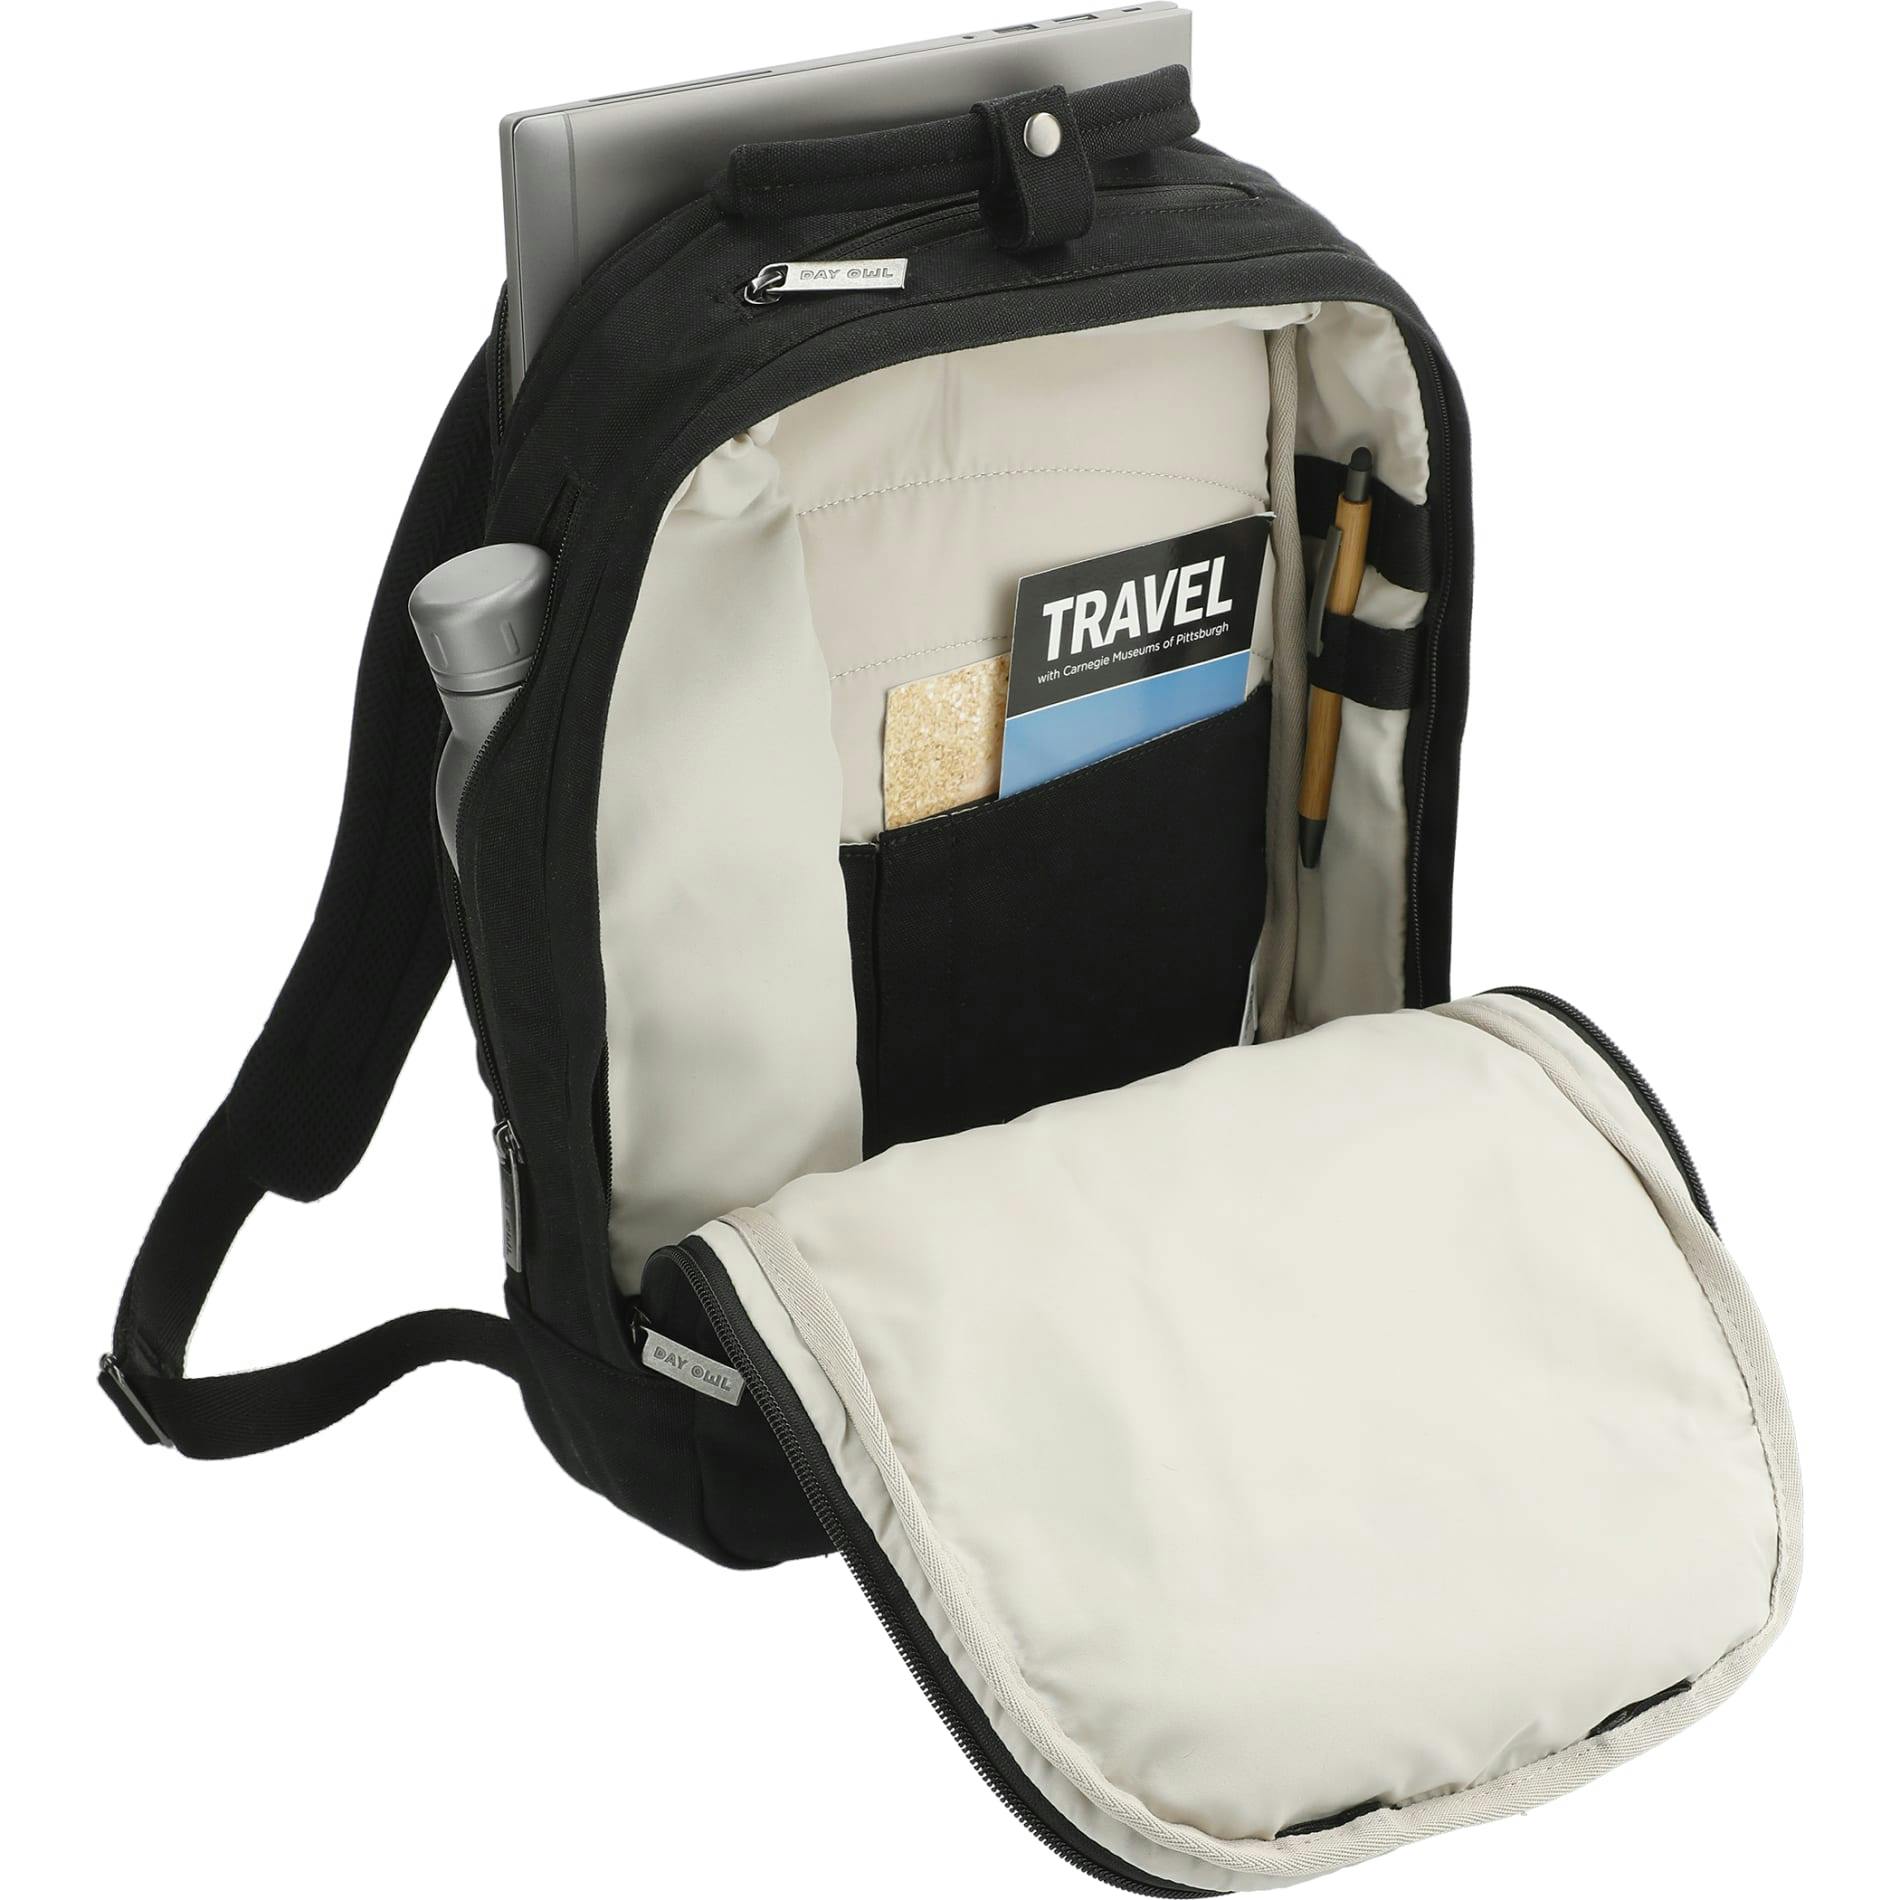 Day Owl Slim 14" Computer Backpack - additional Image 2